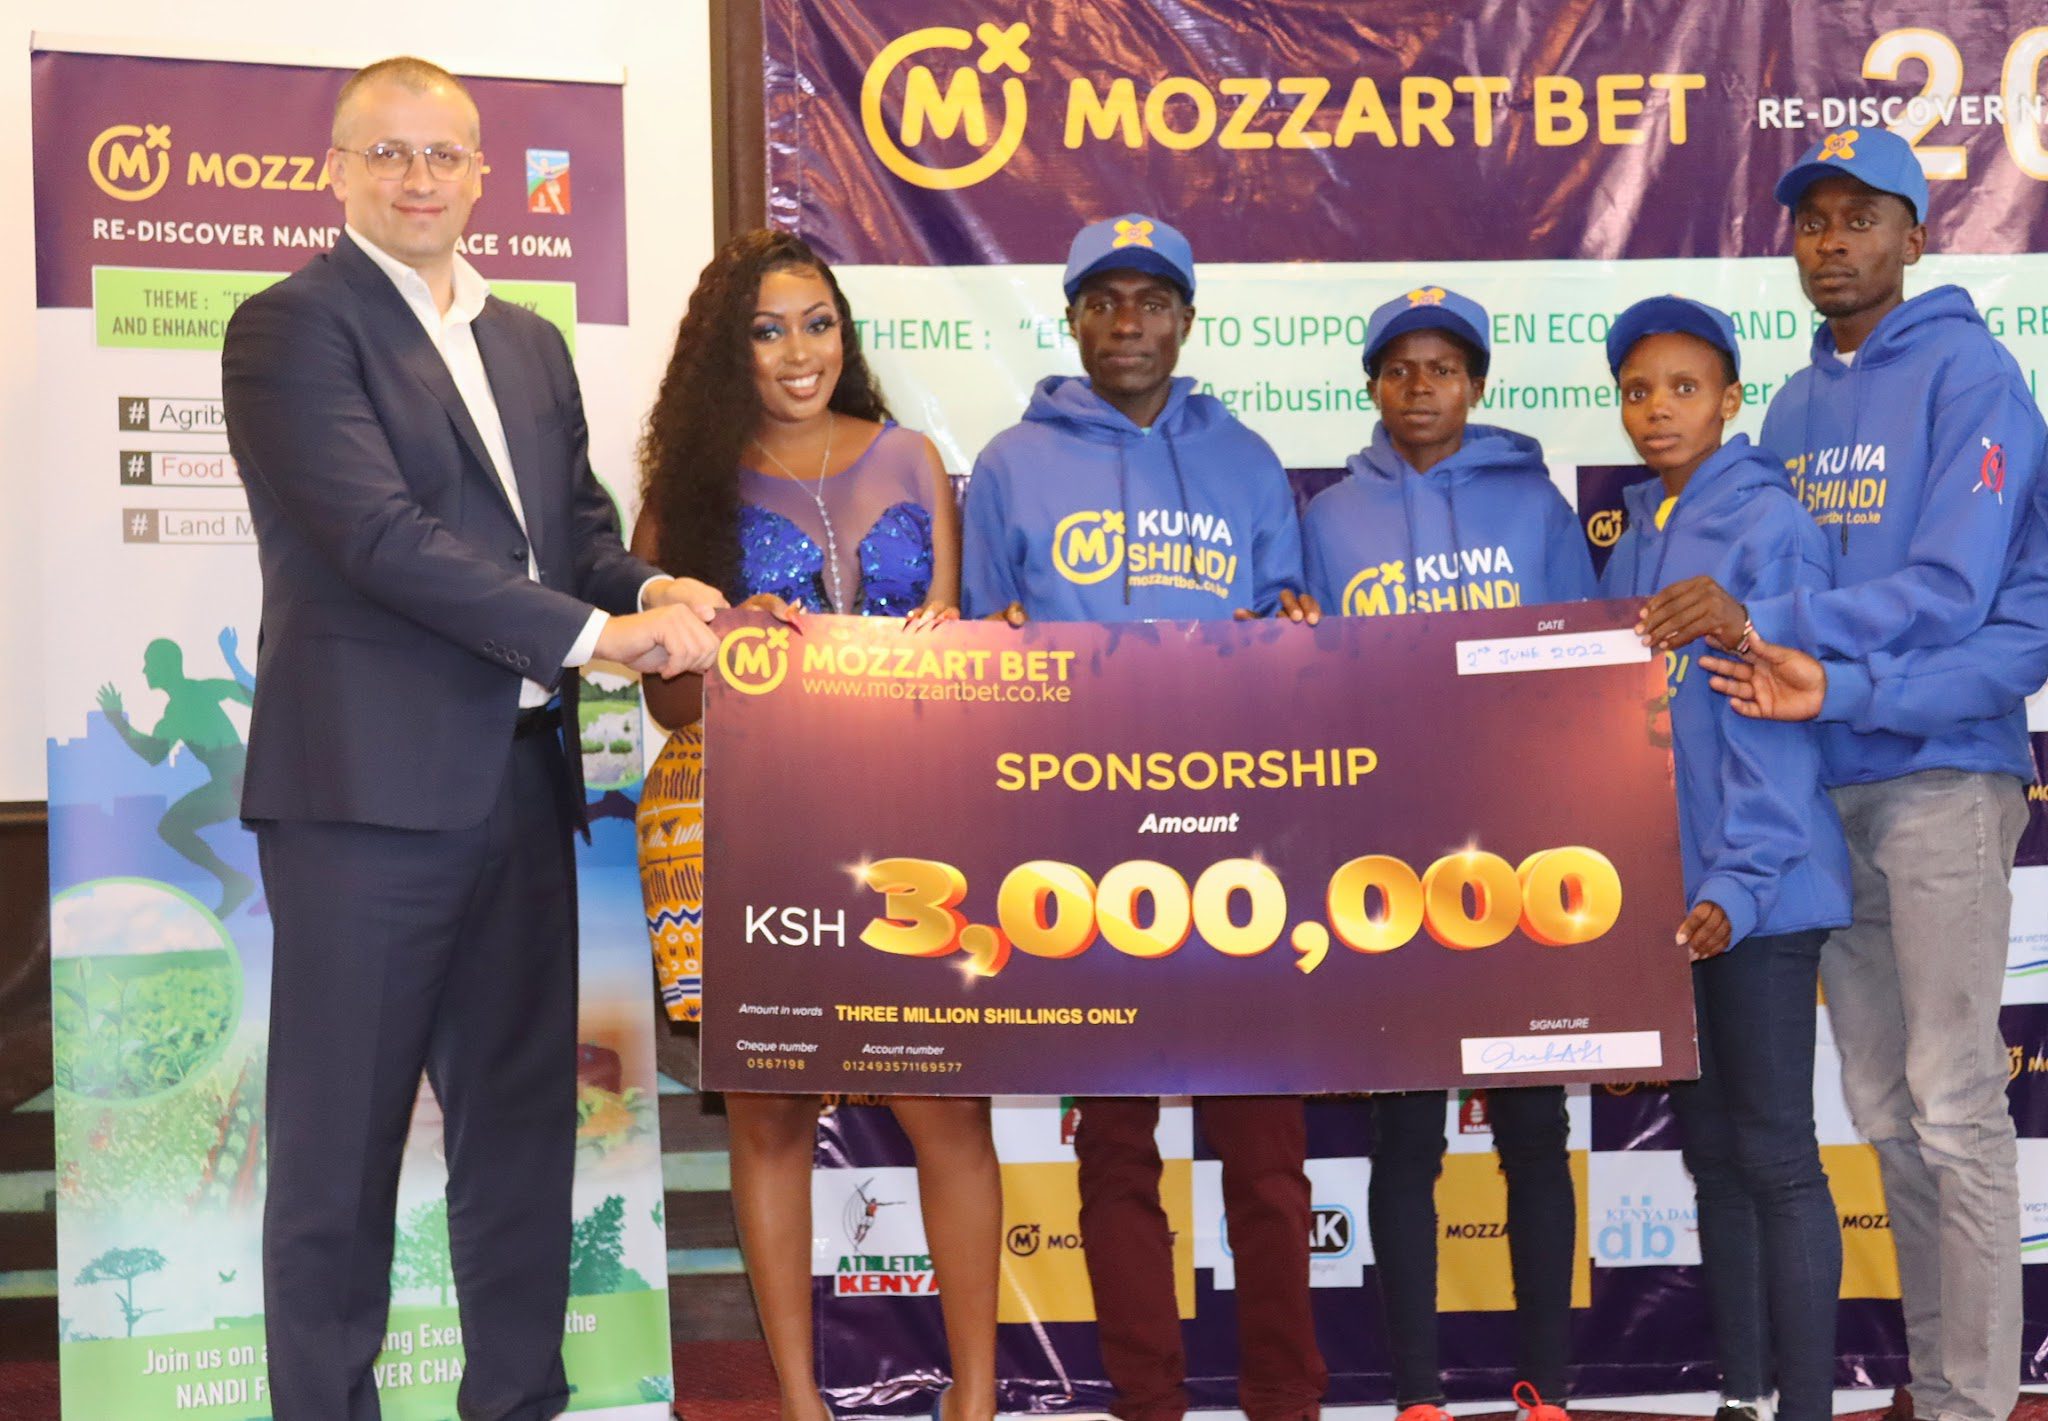 Mozzart Bet: We cannot divorce sports from forests